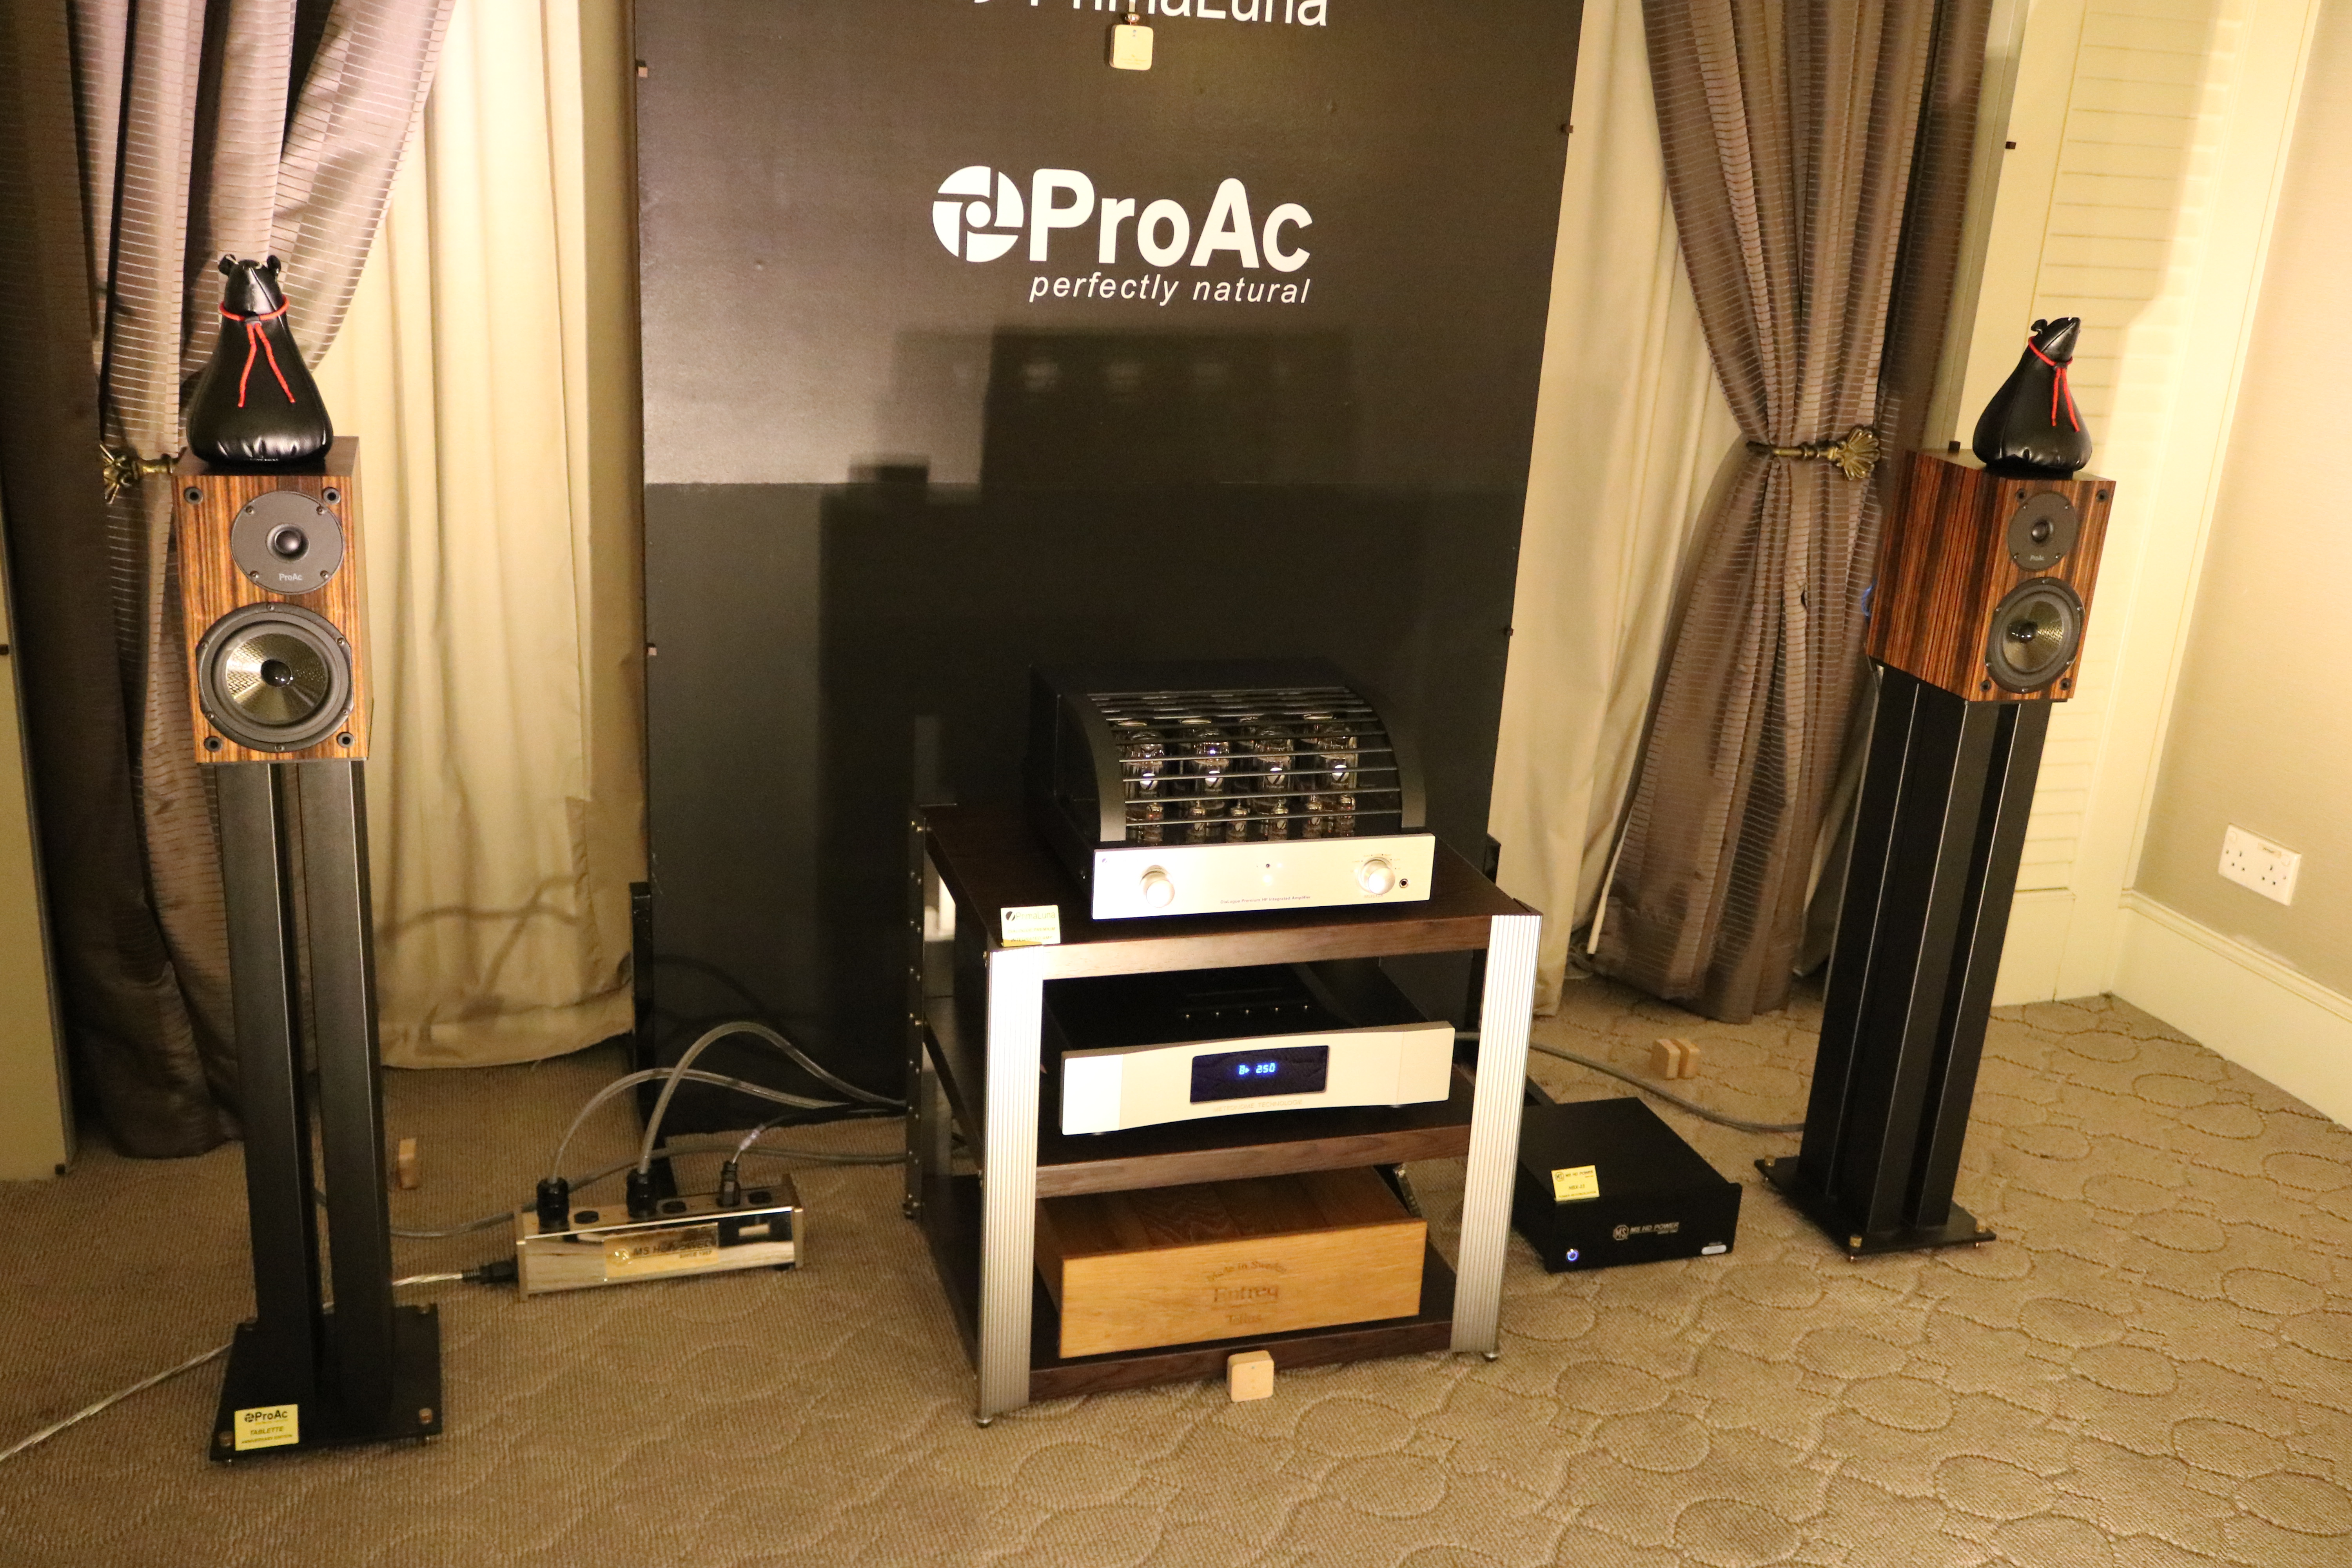 ProAc Tablette, PrimaLuna and Metronome system in the CMY room.